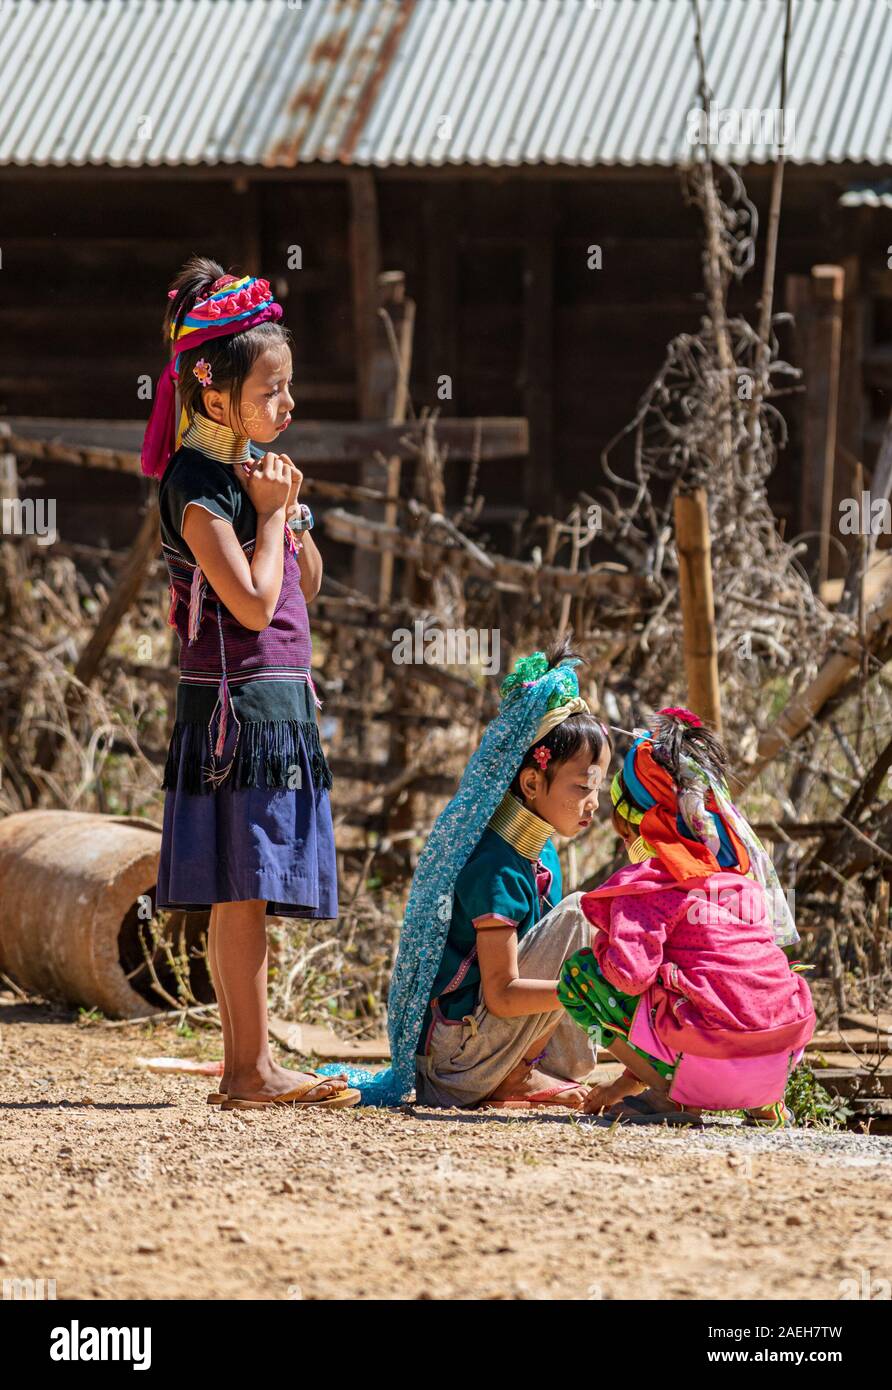 Three young girls from Kayan tribe wearing traditional colorful outfits playing on the road in Pan Pet village. Stock Photo